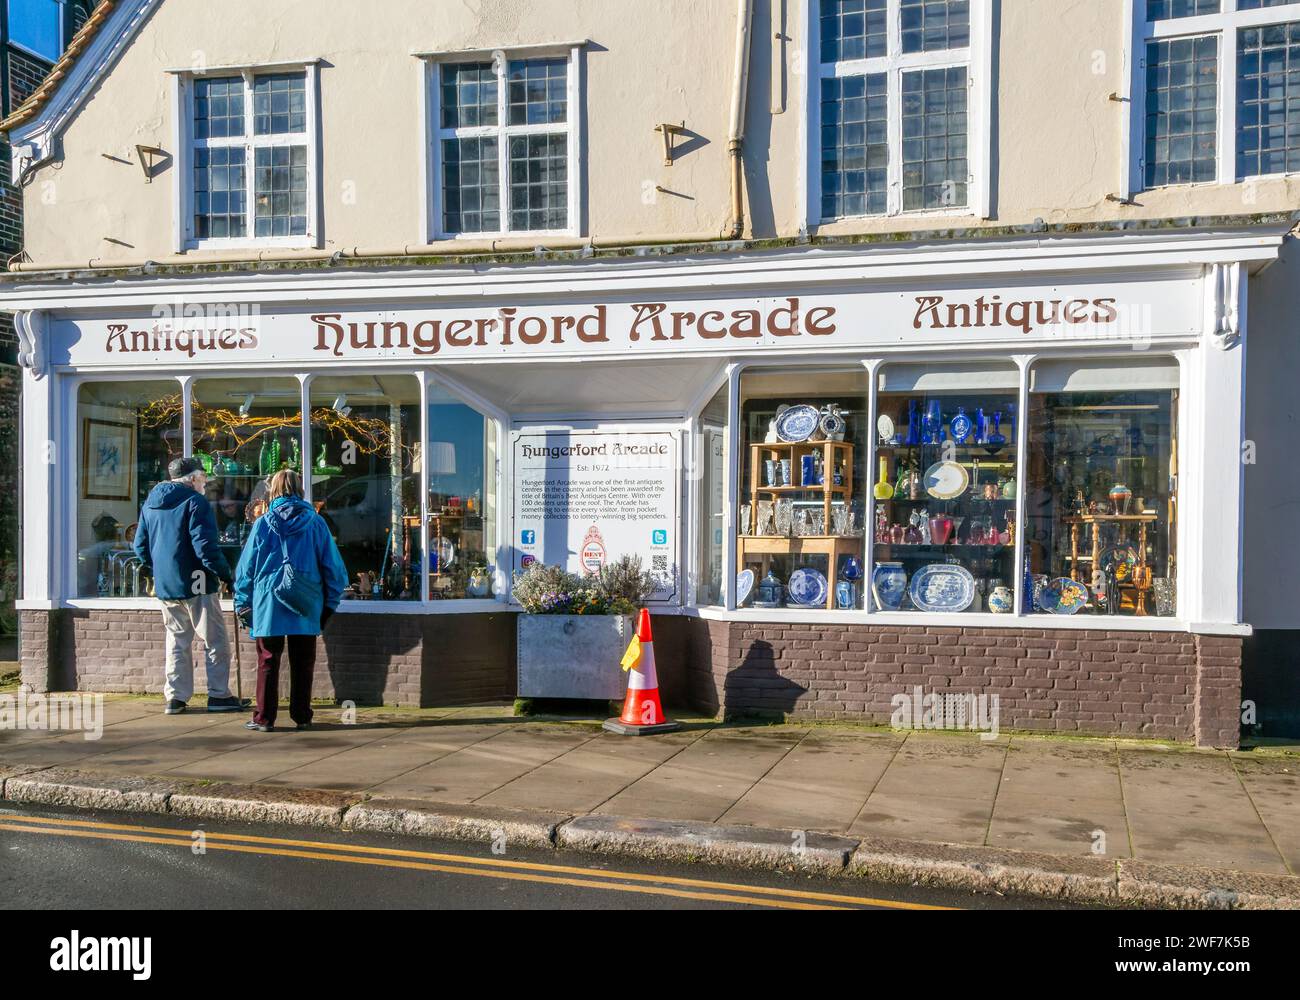 Hungerford Arcade antiques shop, Hungerford, Berkshire, England, UK Stock Photo